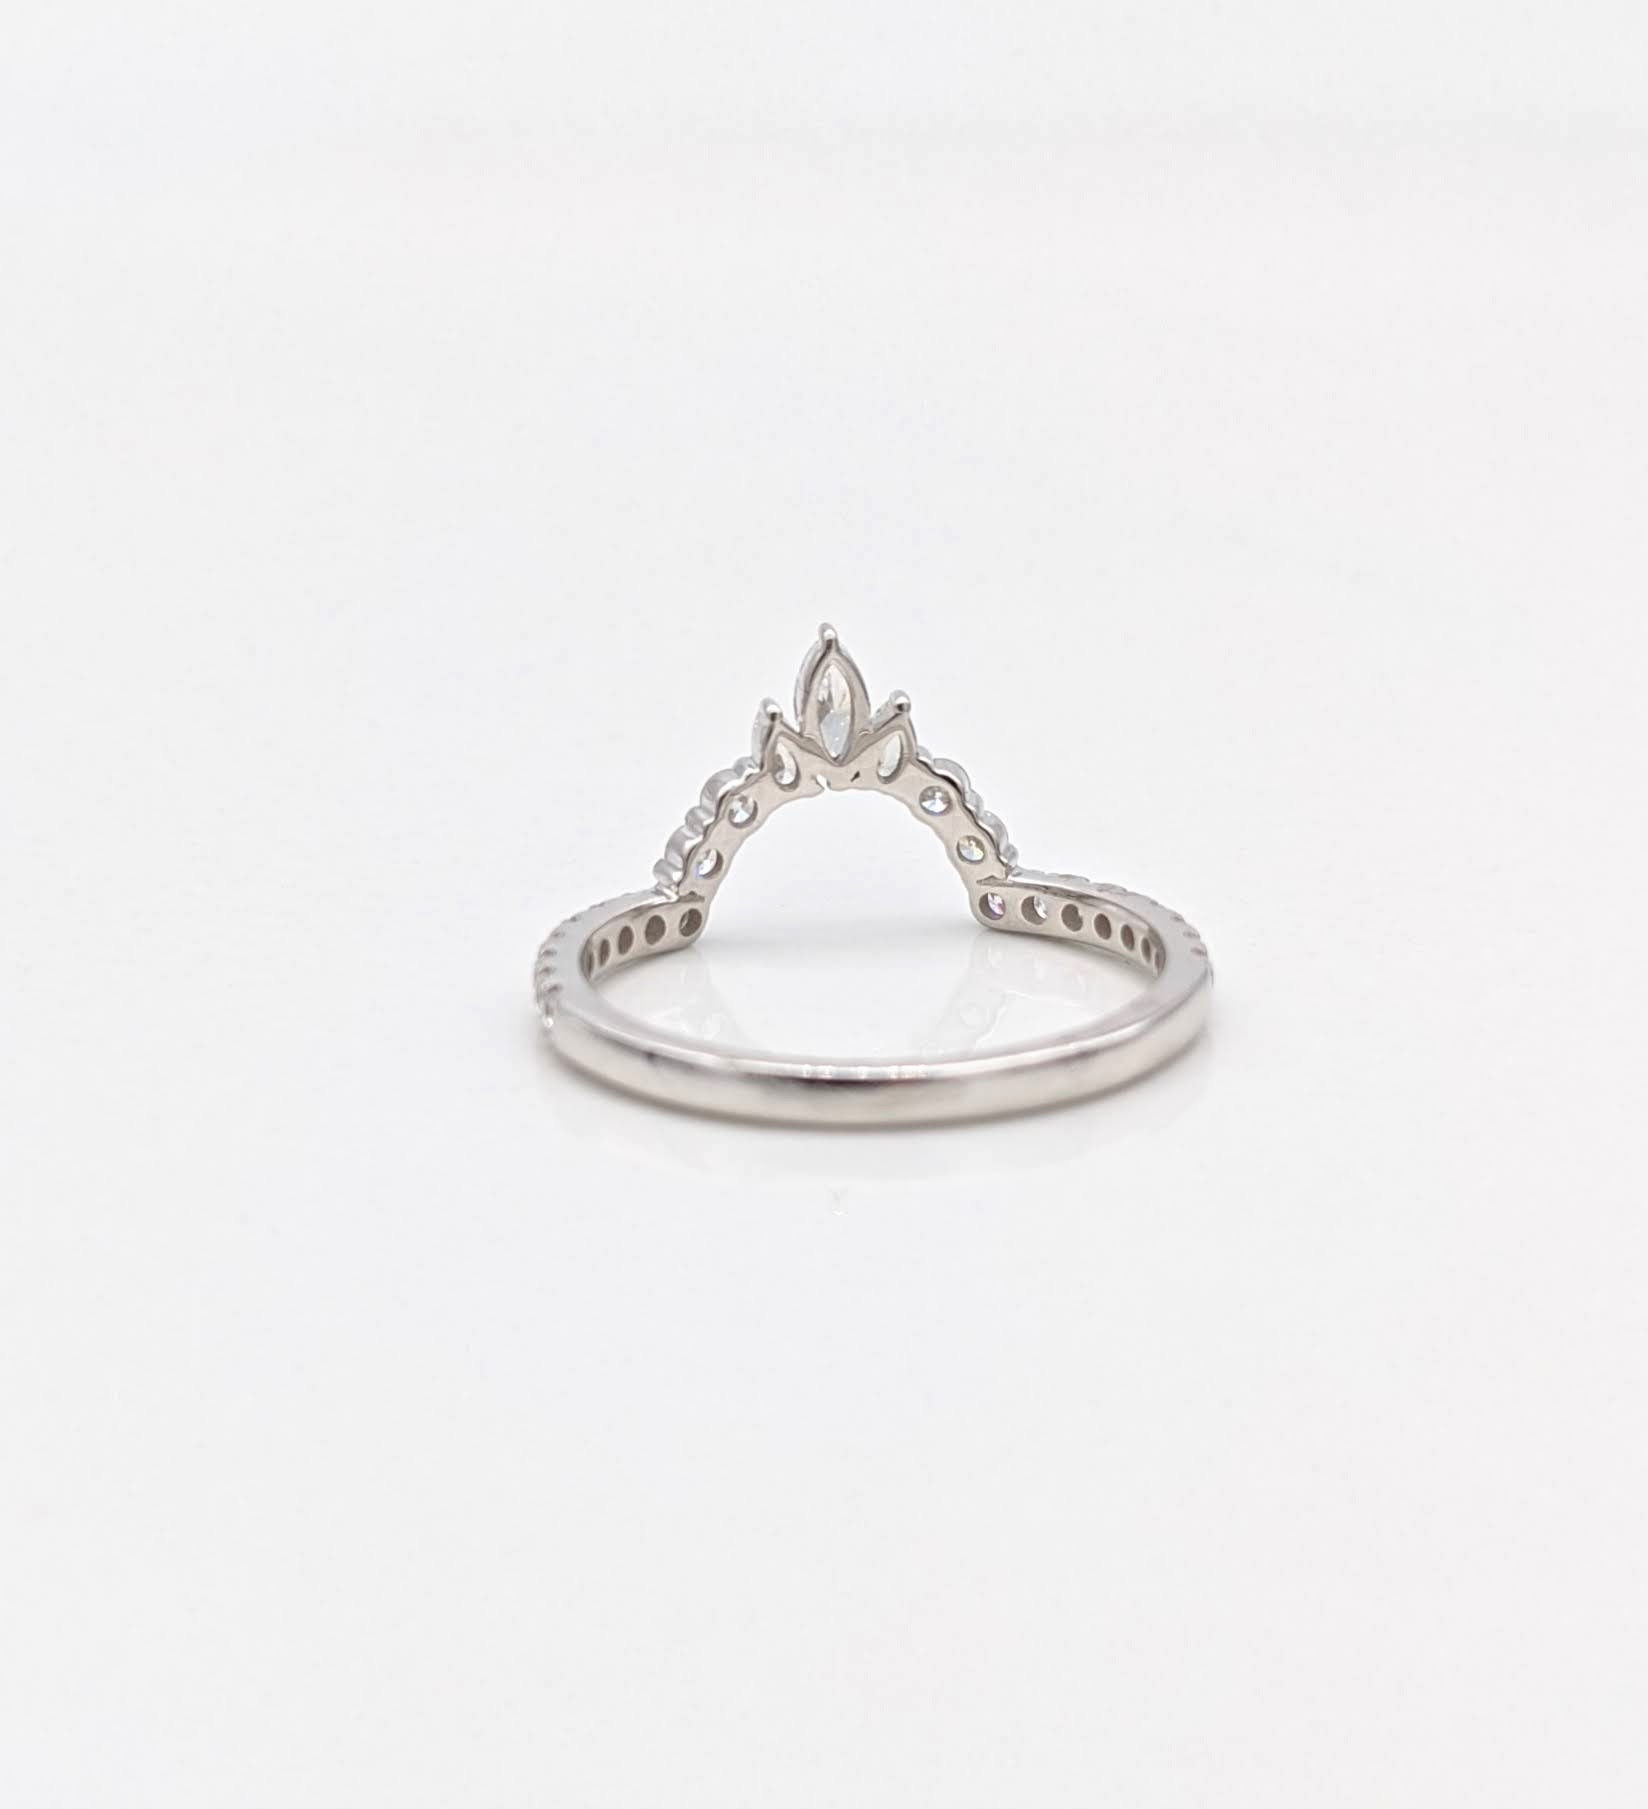 Shadow band for a Pear shape Ring in 14k Gold with round, marquise, and pear natural diamonds/ Wedding Band